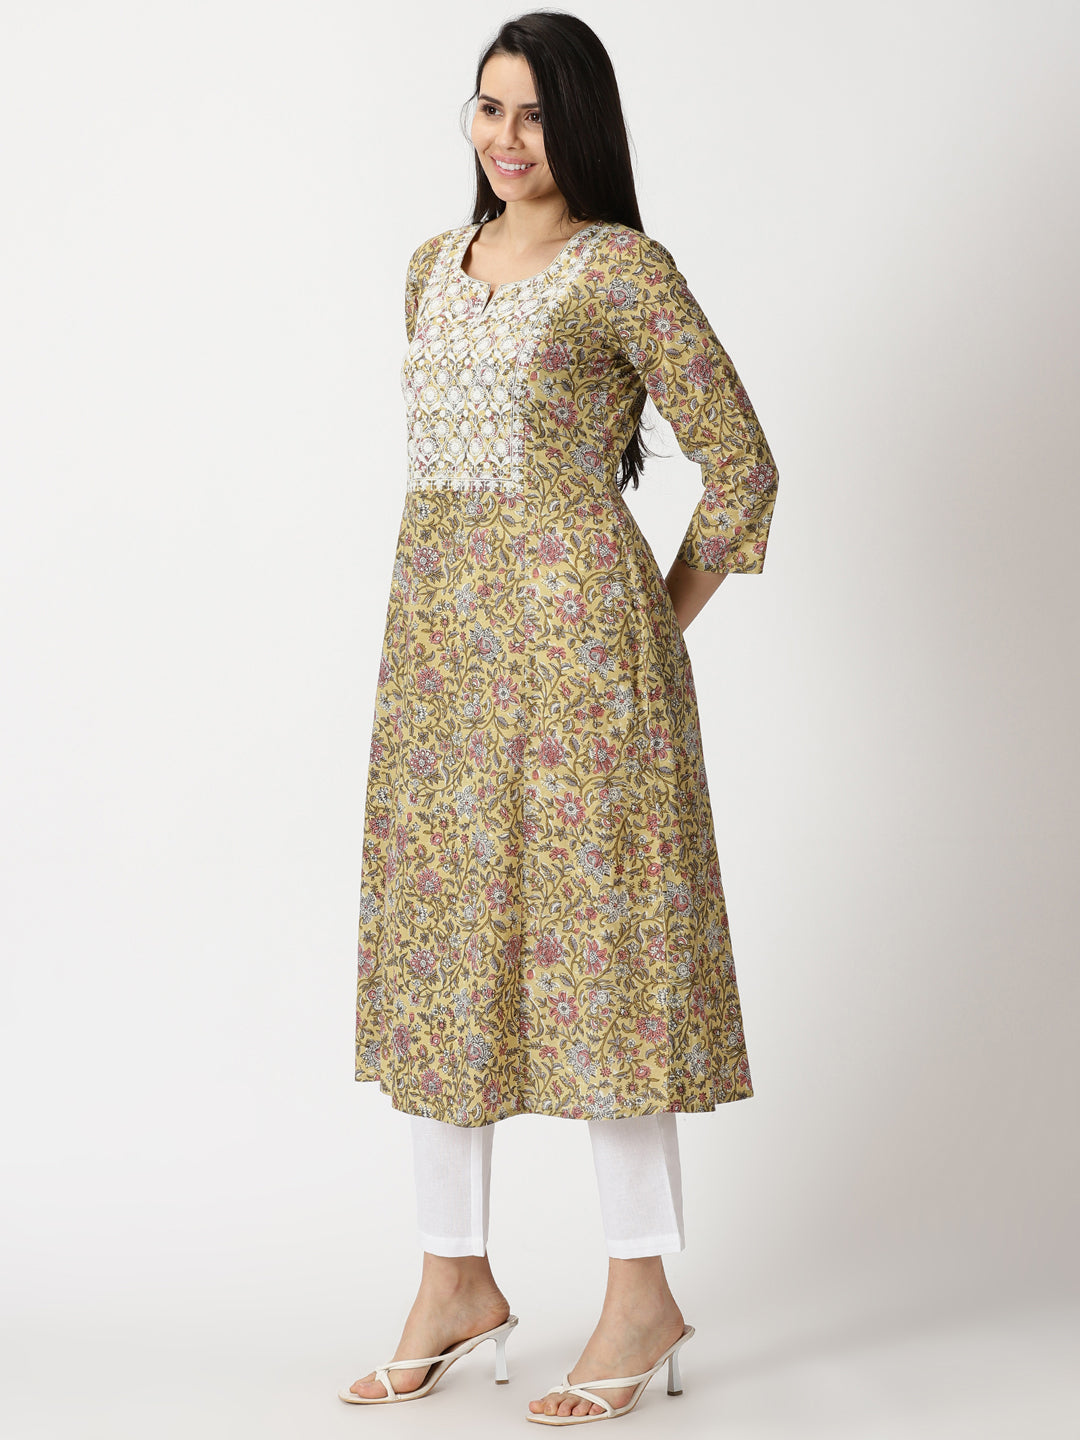 Yellow Floral Print A-line Kurta with Lucknowi Chikankari Embroidery